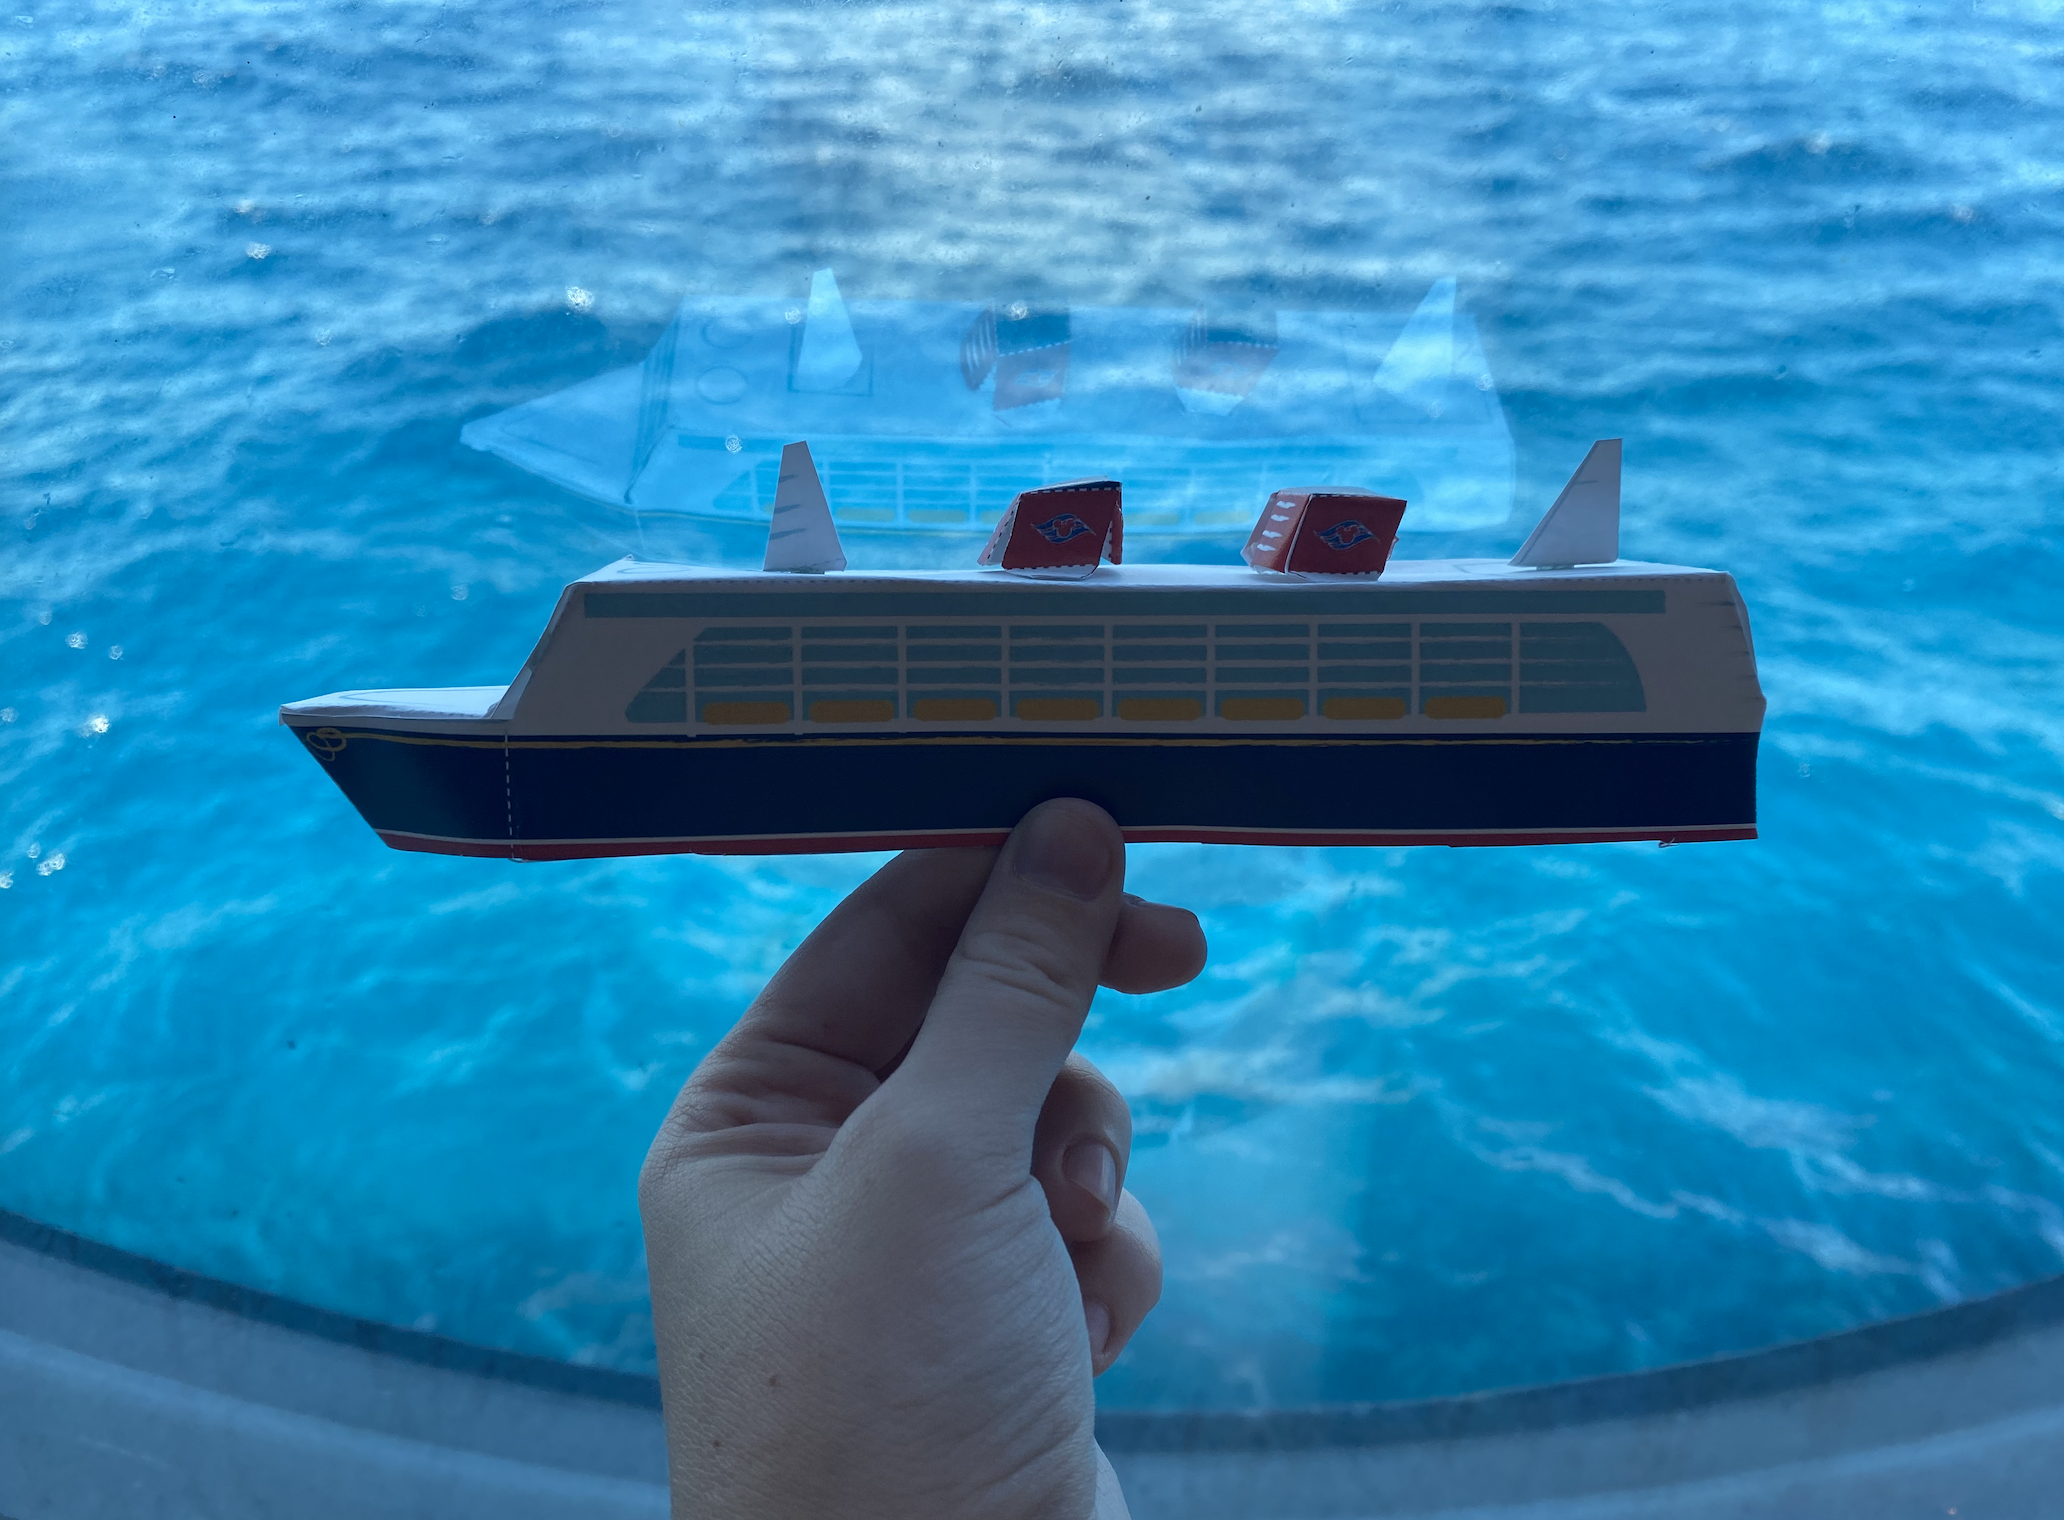 A hand holding a small paper model of a cruise ship in front of a window showing the ocean water outside